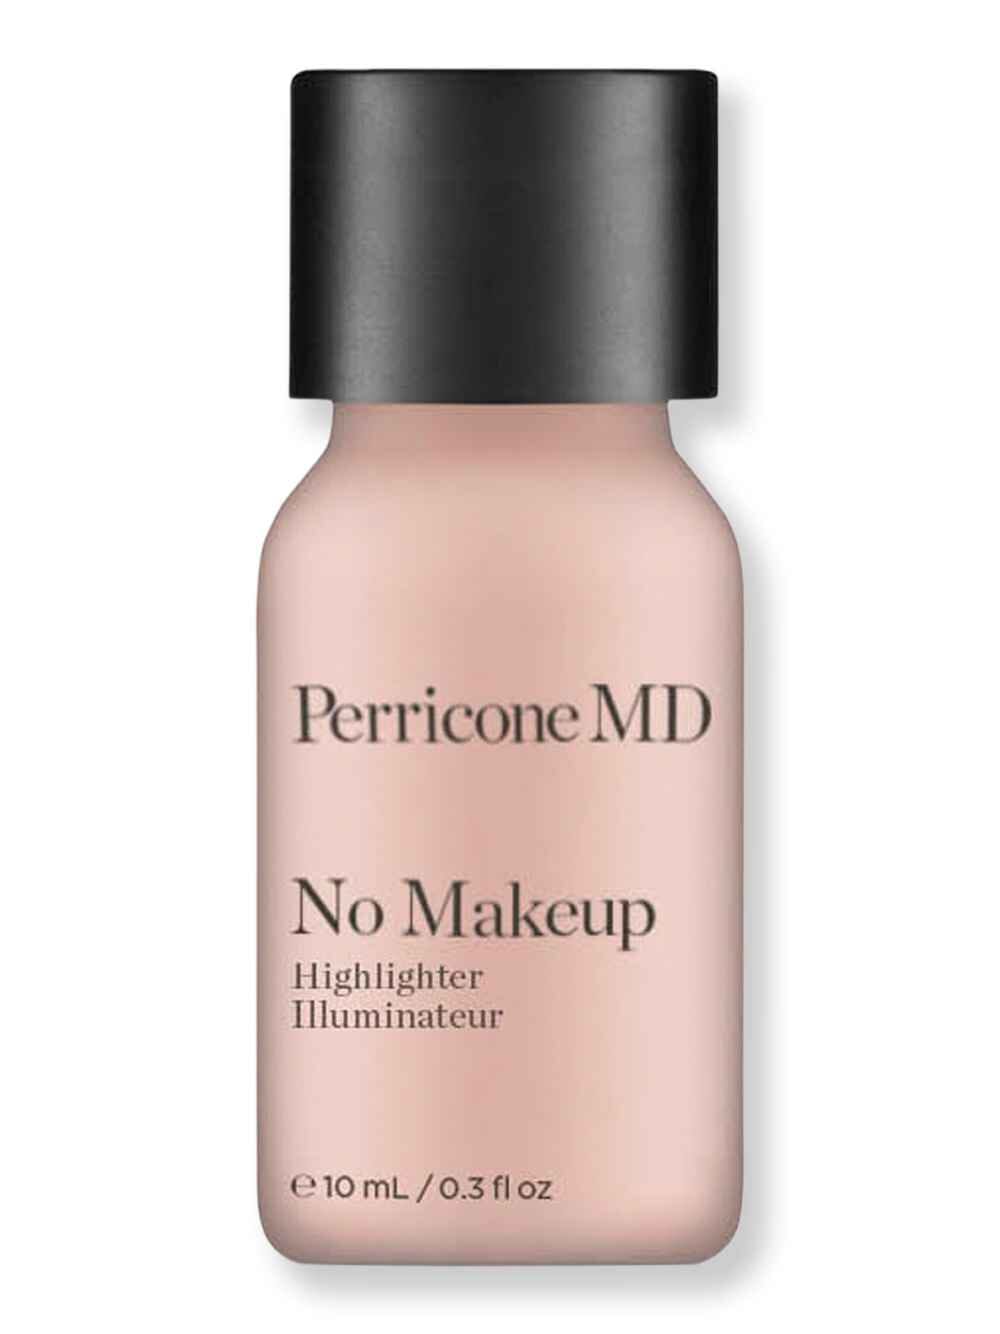 Perricone MD Perricone MD No Makeup Highlighter 0.3 oz10 ml Tinted Moisturizers & Foundations 